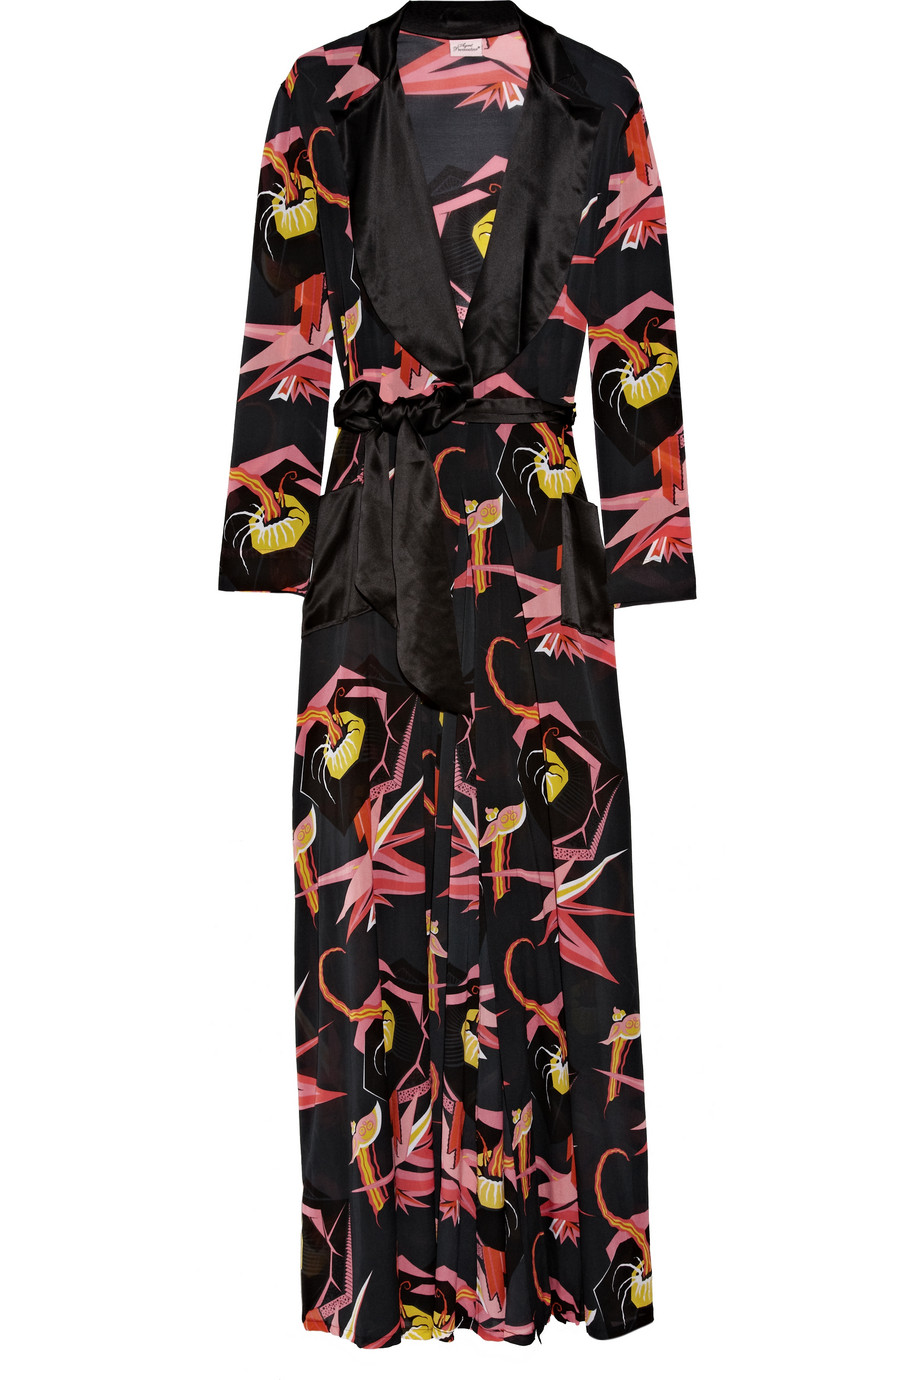 Agent Provocateur Orchid Stretch-silk Robe in Black | Lyst